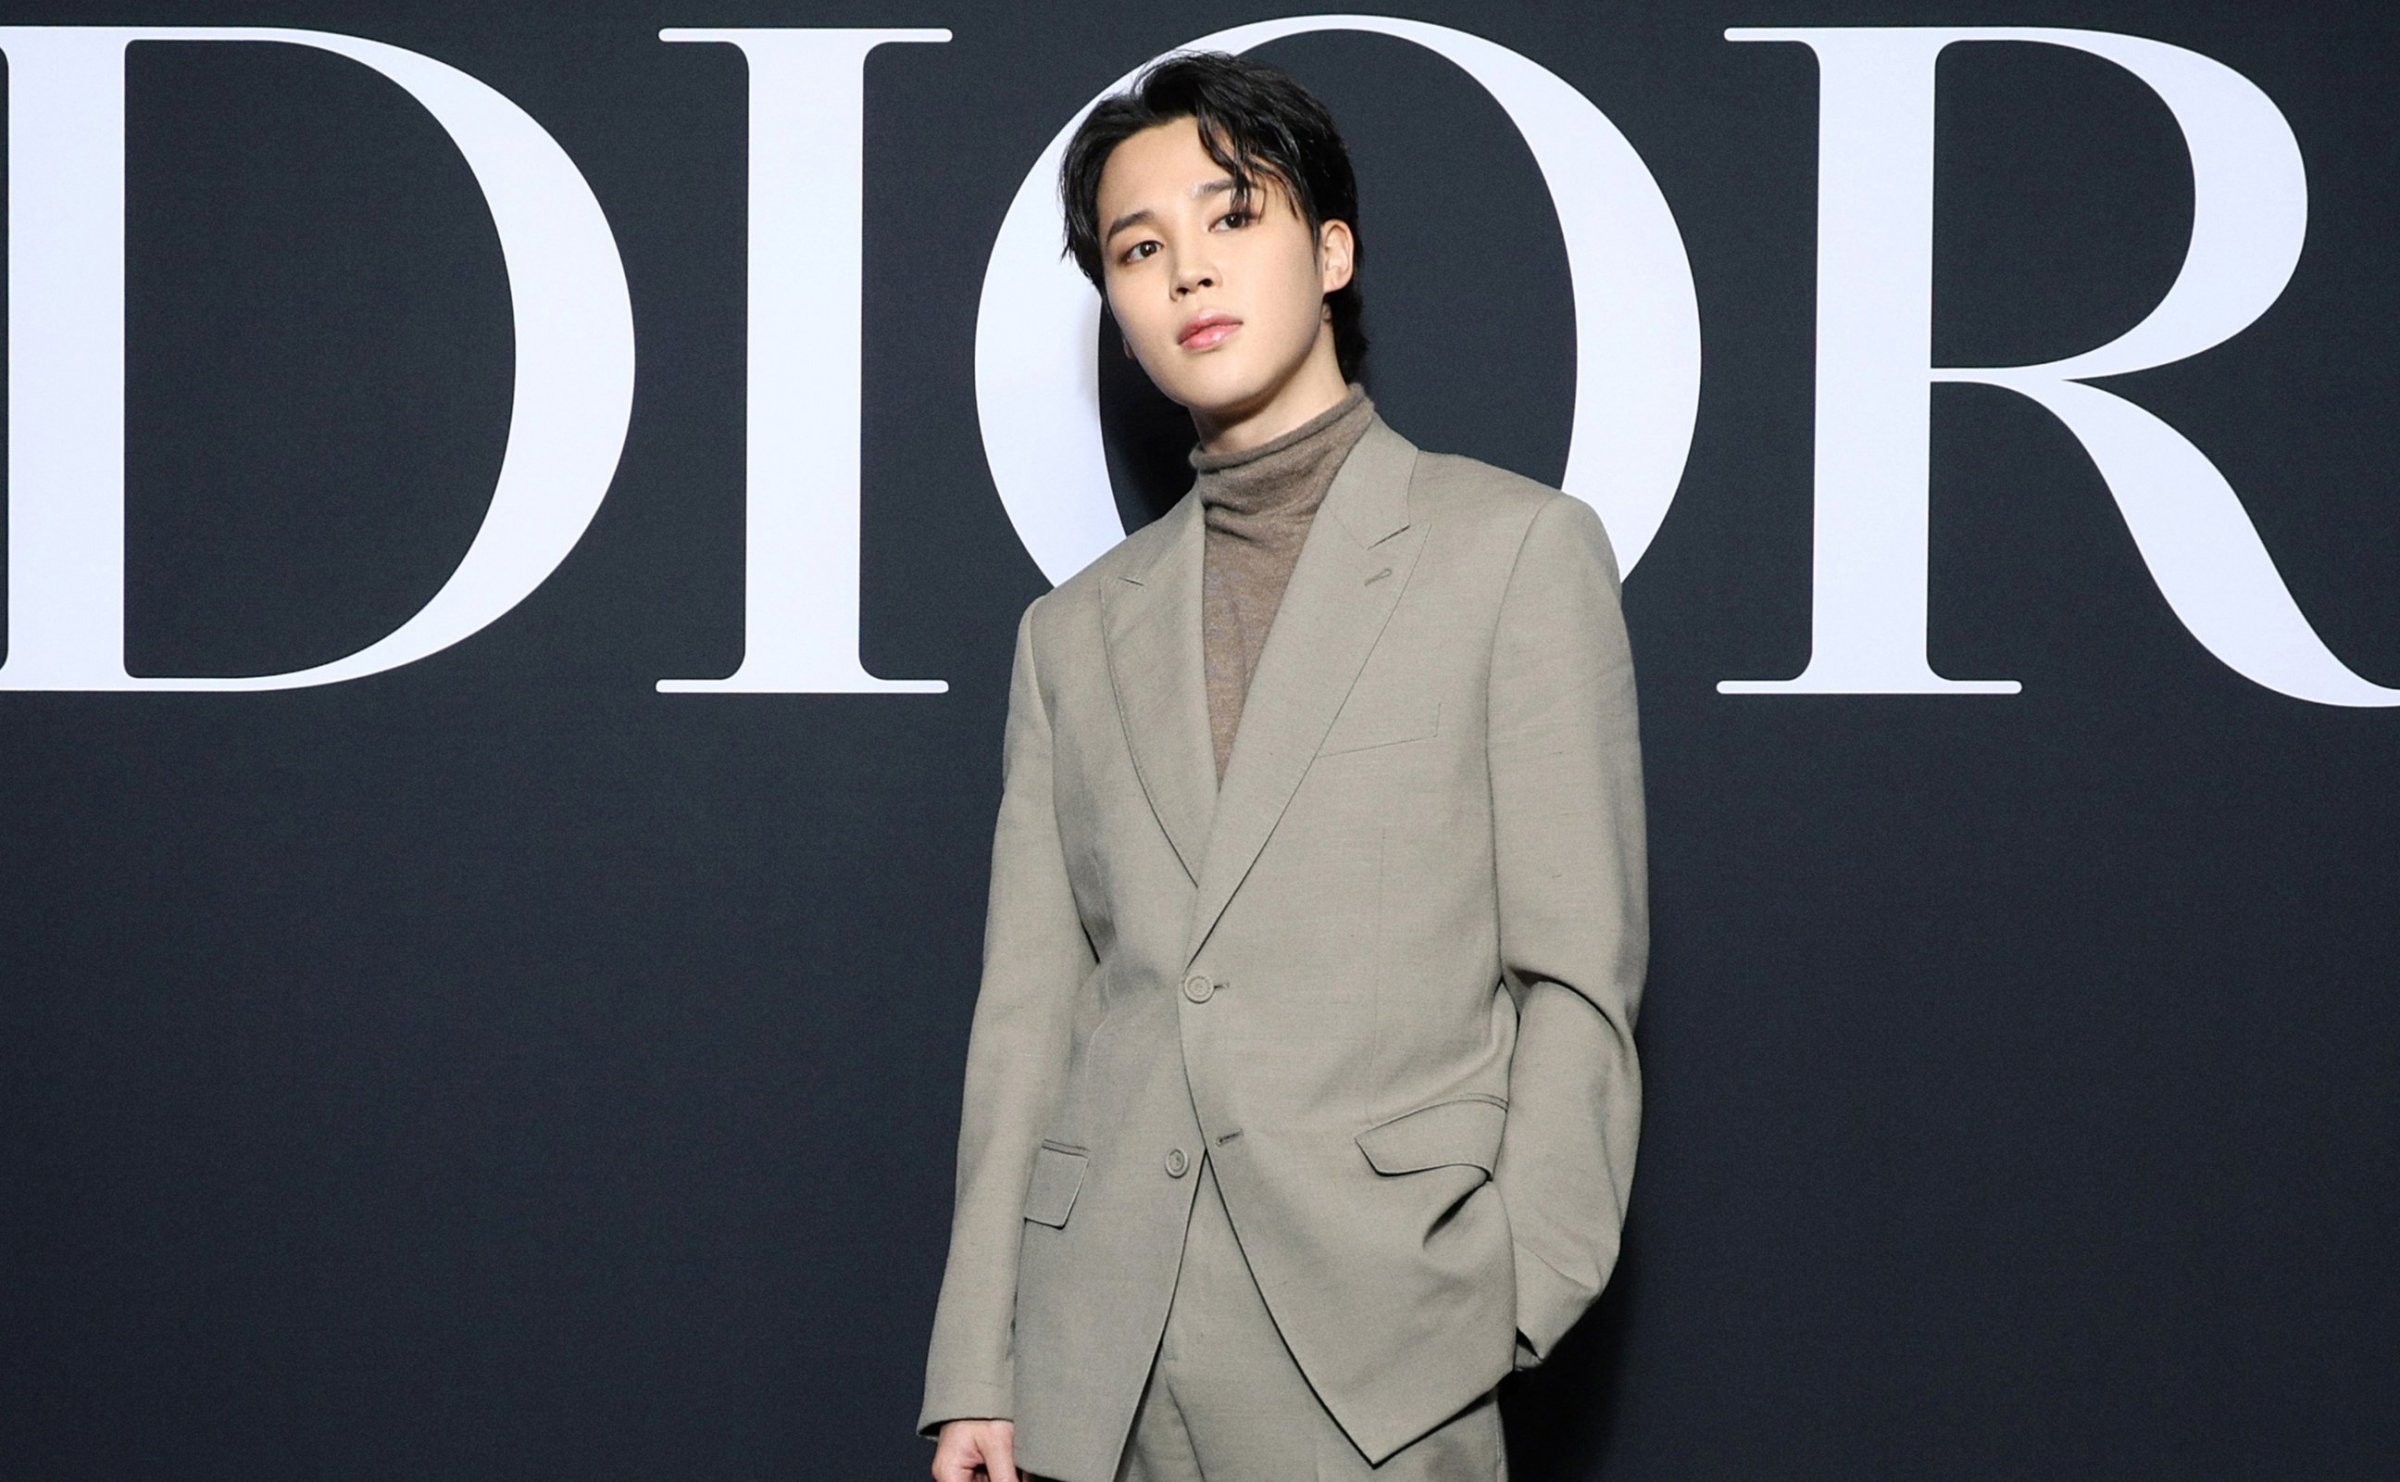 BTS's Jimin looks fabulous at the Dior fashion event in Paris with J-Hope